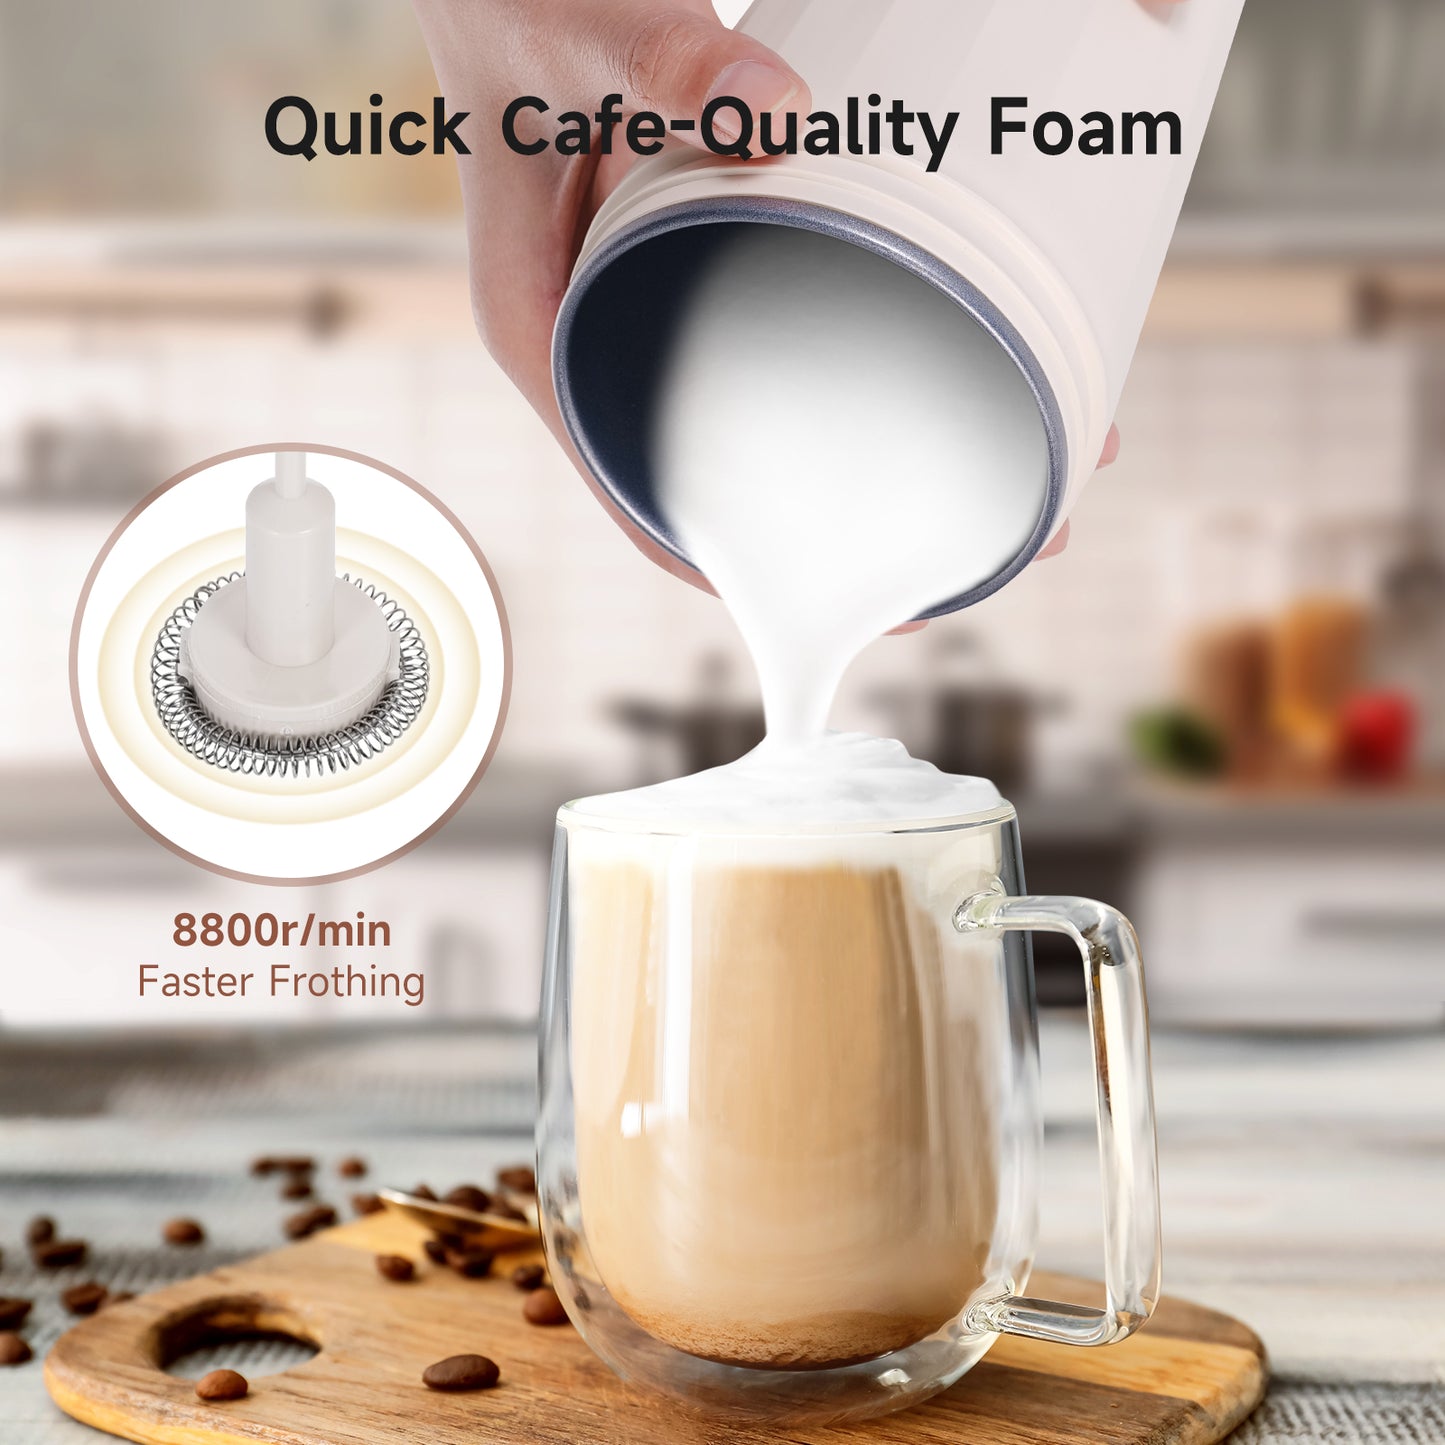 Eastsign Milk Frother Cup